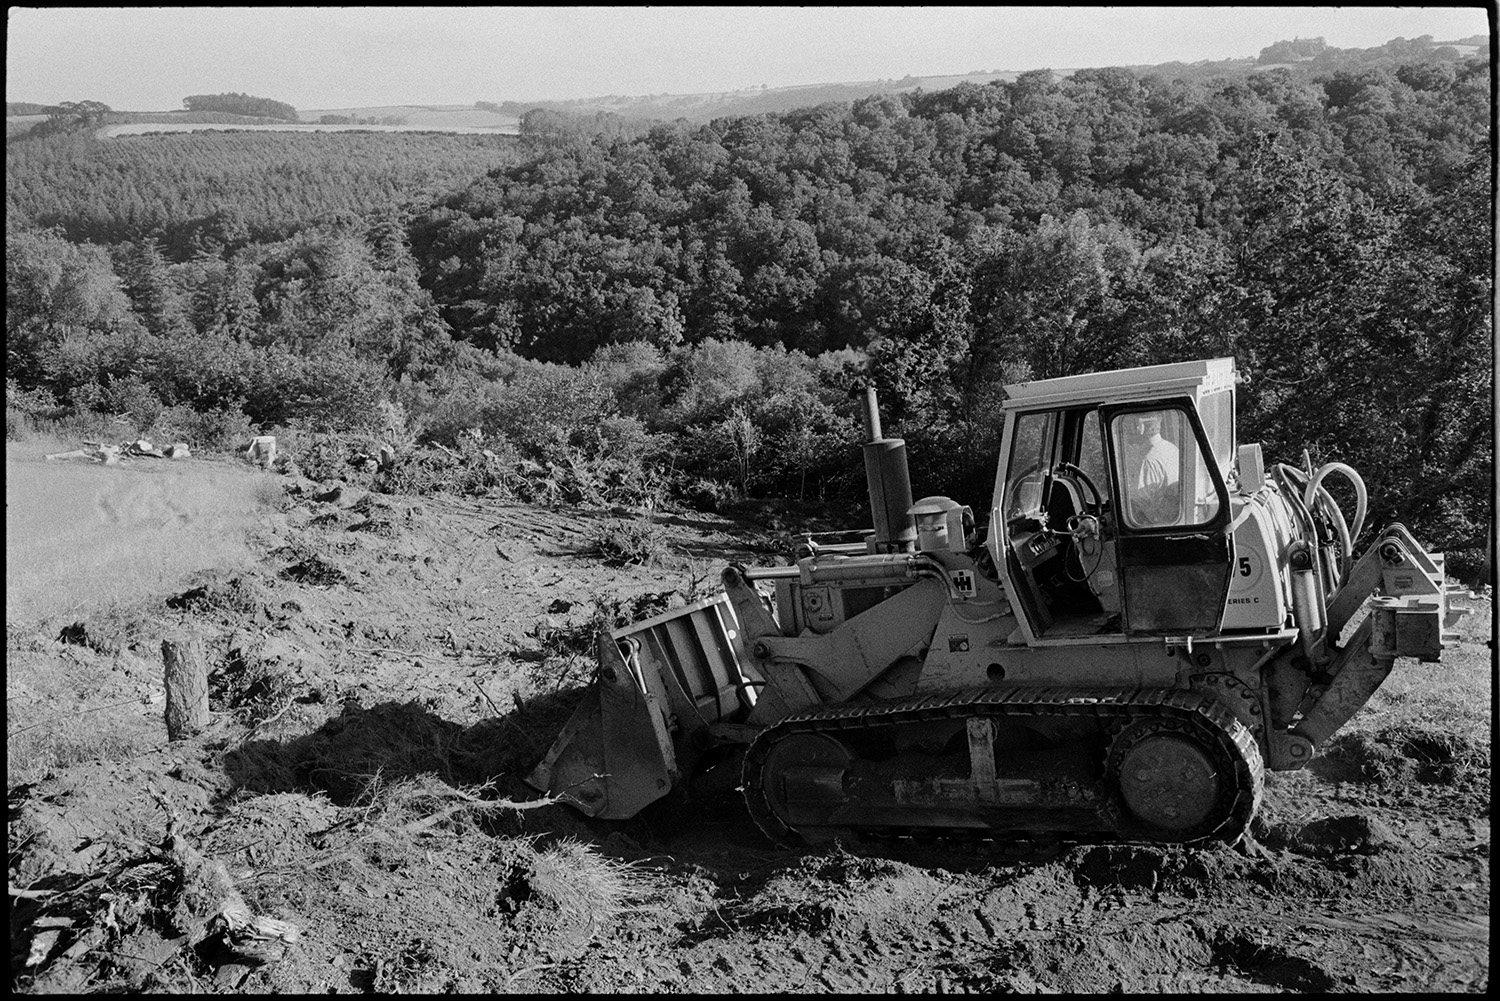 Bulldozer clearing land, former rough woodland.
[A bulldozer clearing rough woodland above Millhams, Dolton, with a view of more woodland and trees in the background.]